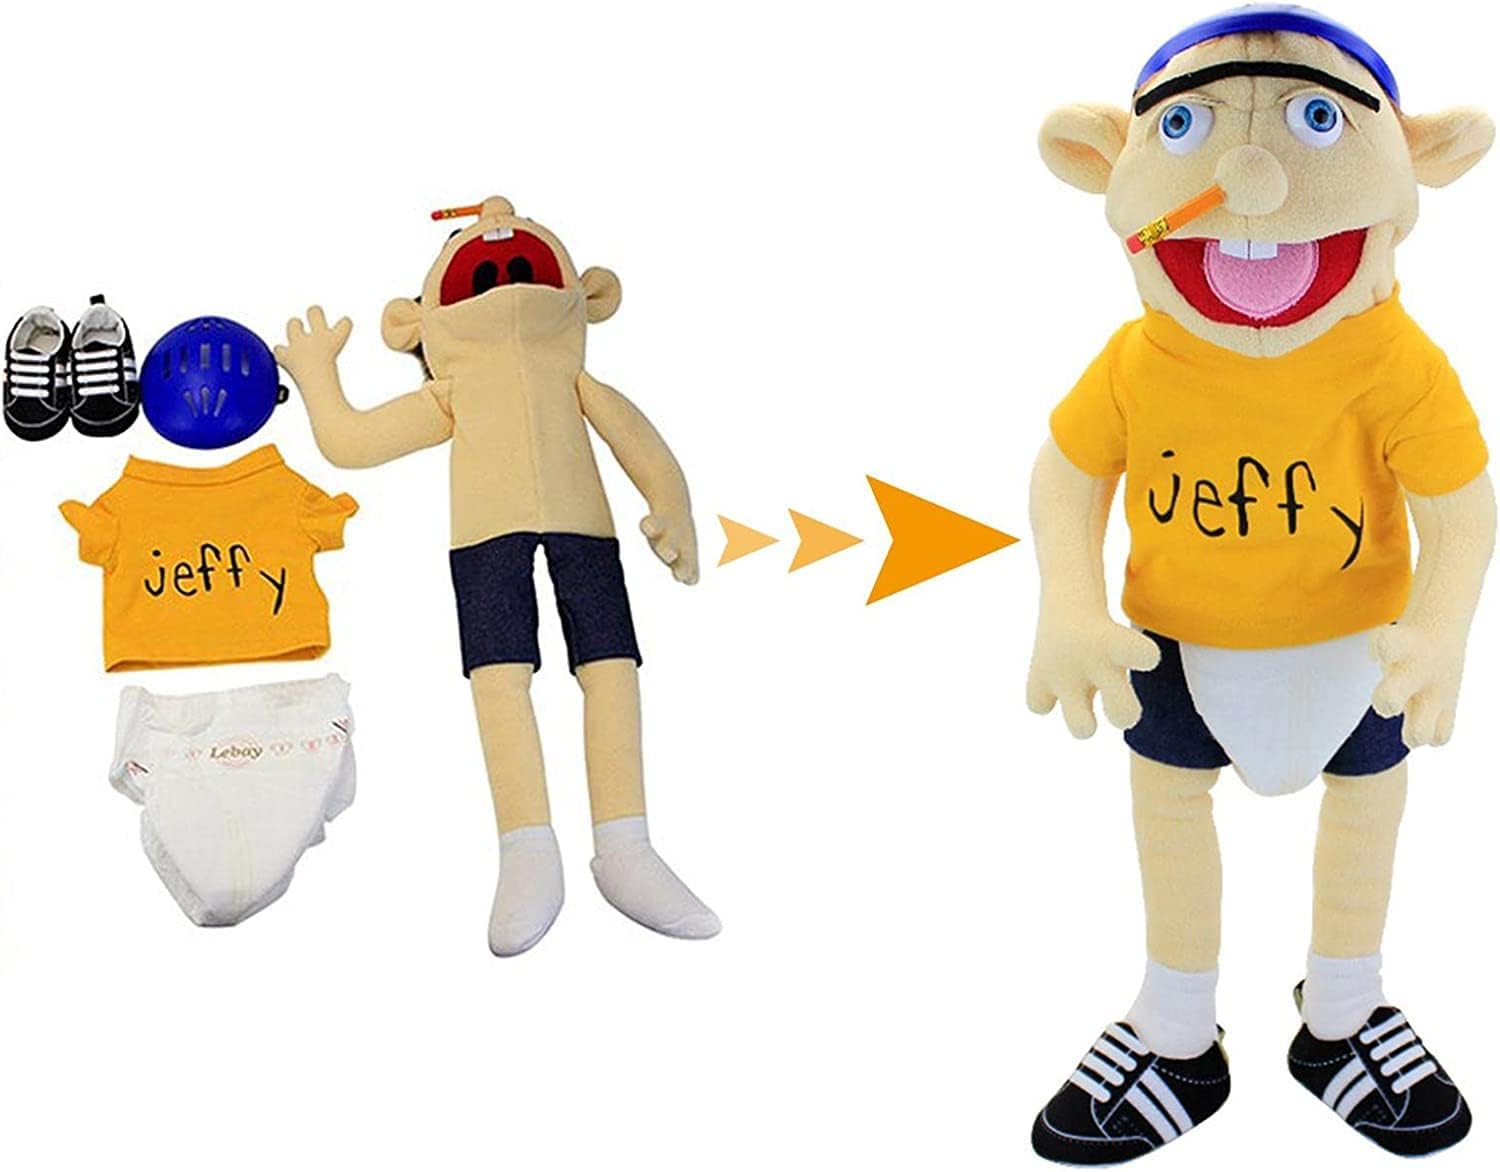 Jeffy Puppet Plush Toy Doll, 60cm Hand Puppet,Mischievous Funny Puppets Toy With Working Mouth, For Birthday Christmas Halloween Party Teaching Preschool